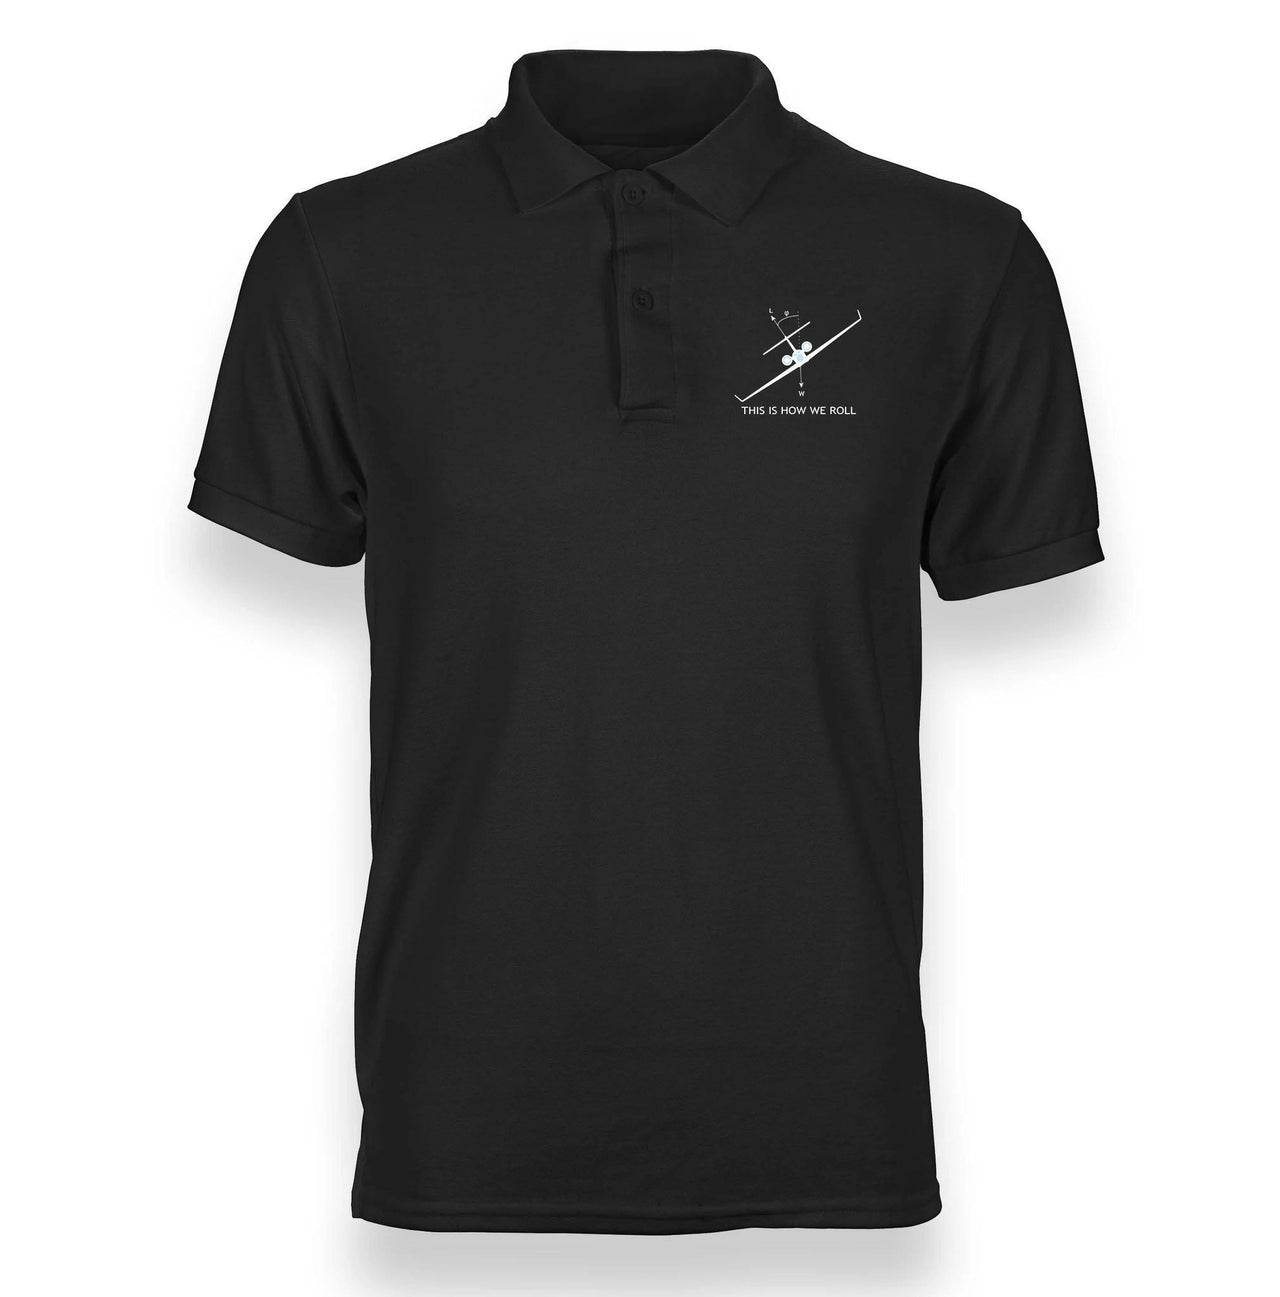 THIS IS HOW WE ROLL POLO SHIRT THE AV8R